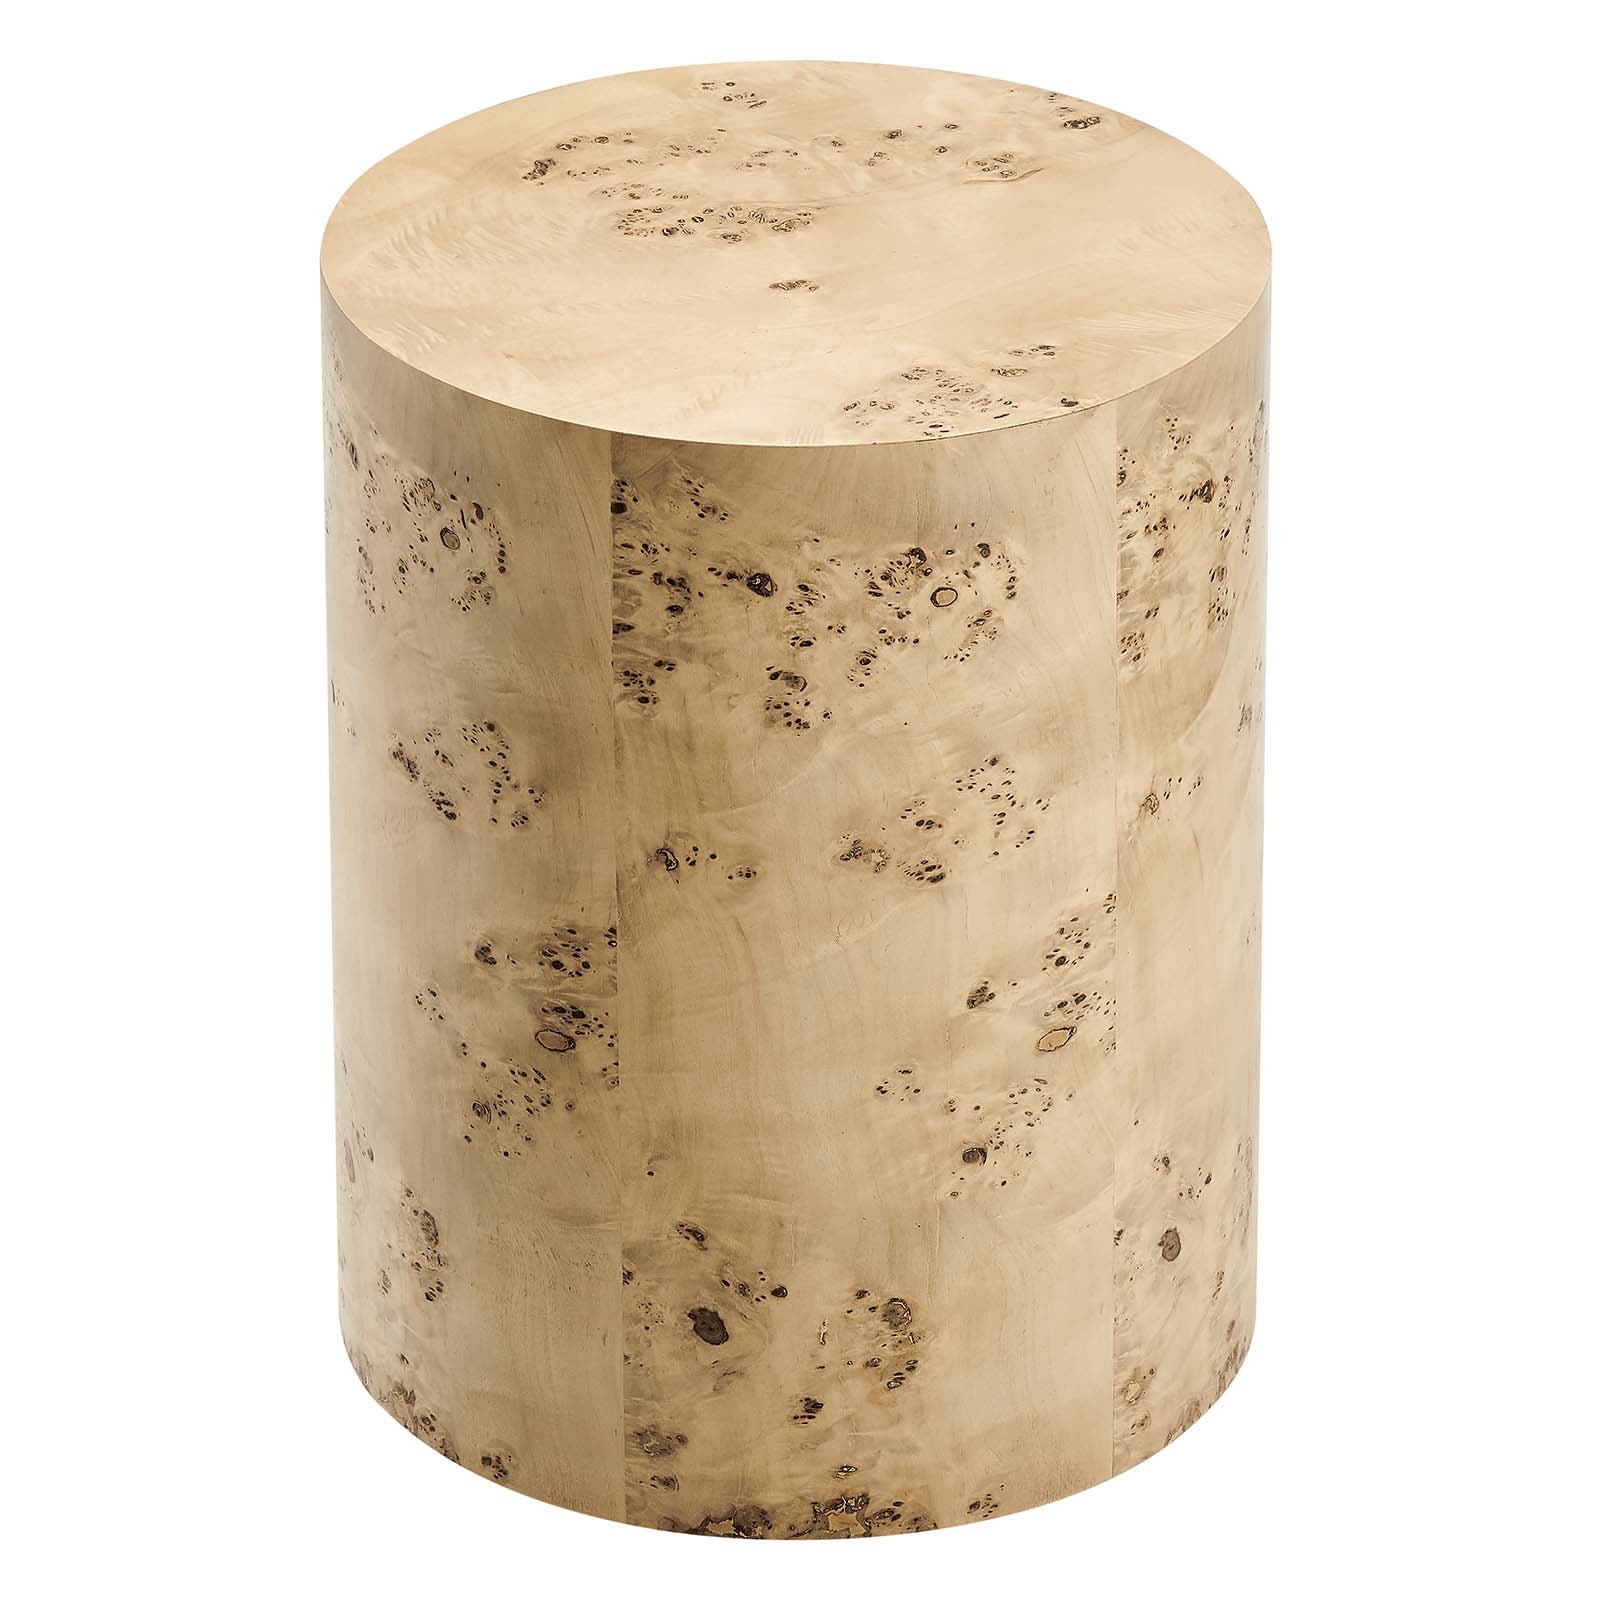 Cosmos 16" Round Burl Wood Side Table - East Shore Modern Home Furnishings